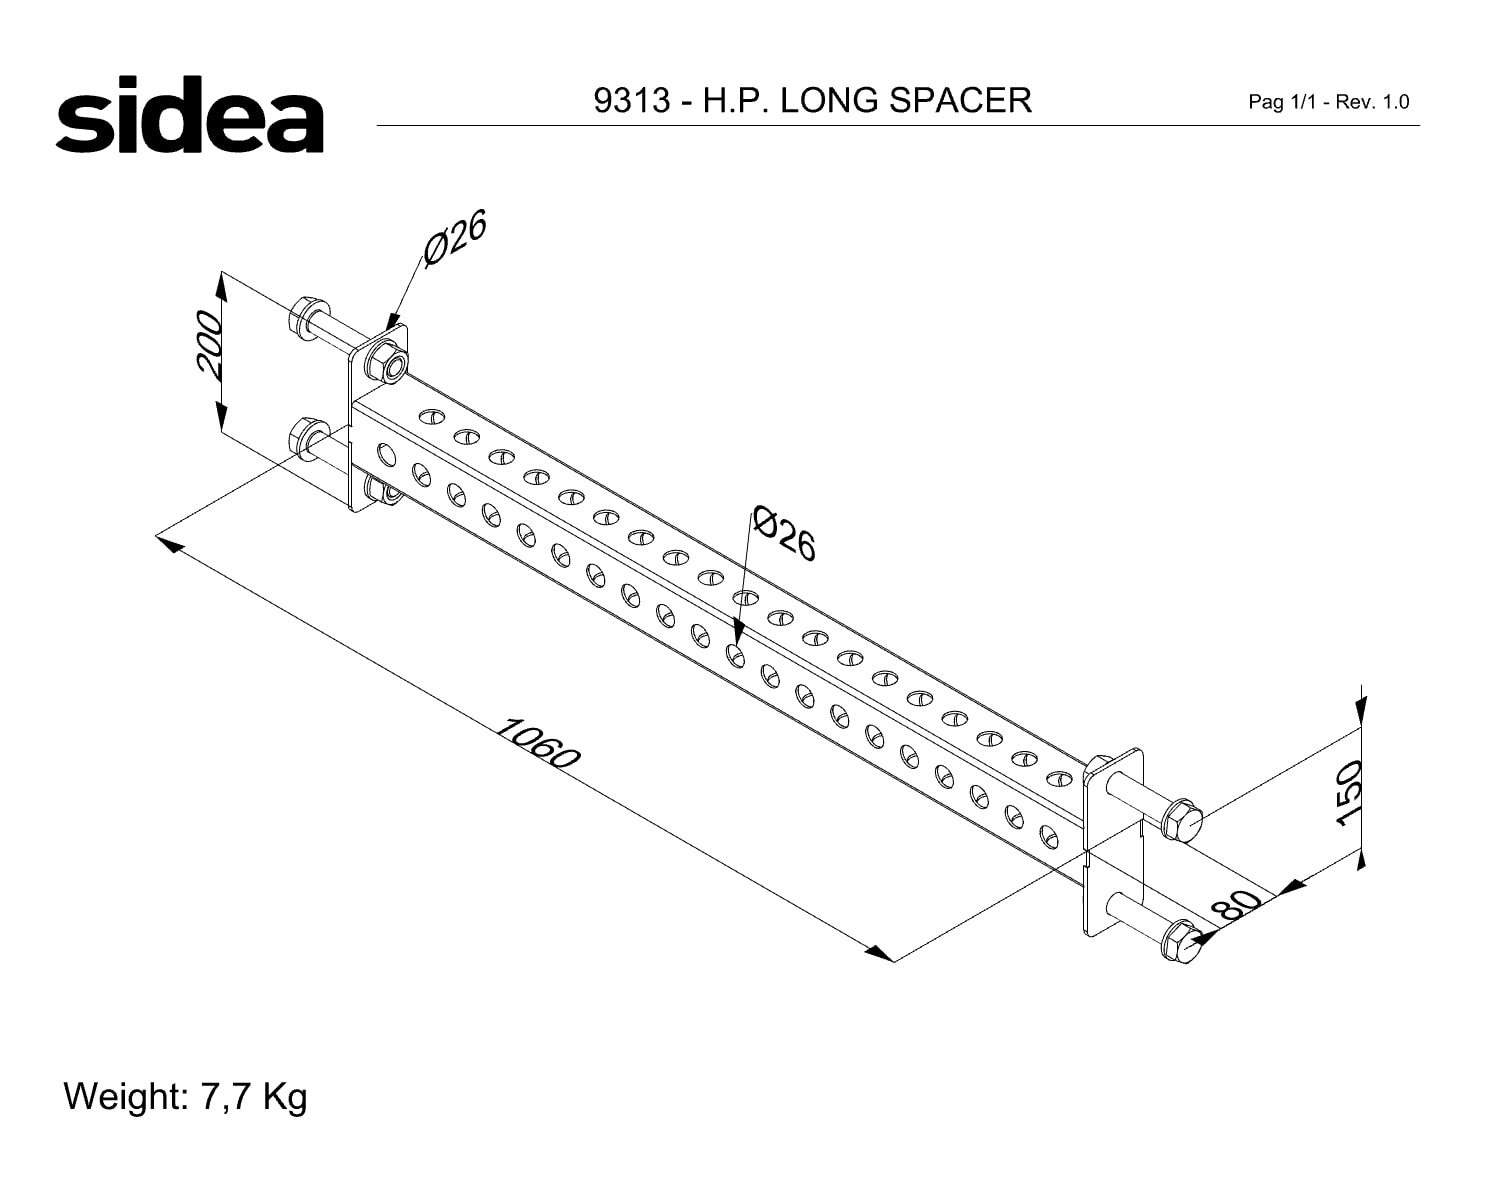 9313 - QUOTE - H.P. LONG SPACER - AGG.29-08-23